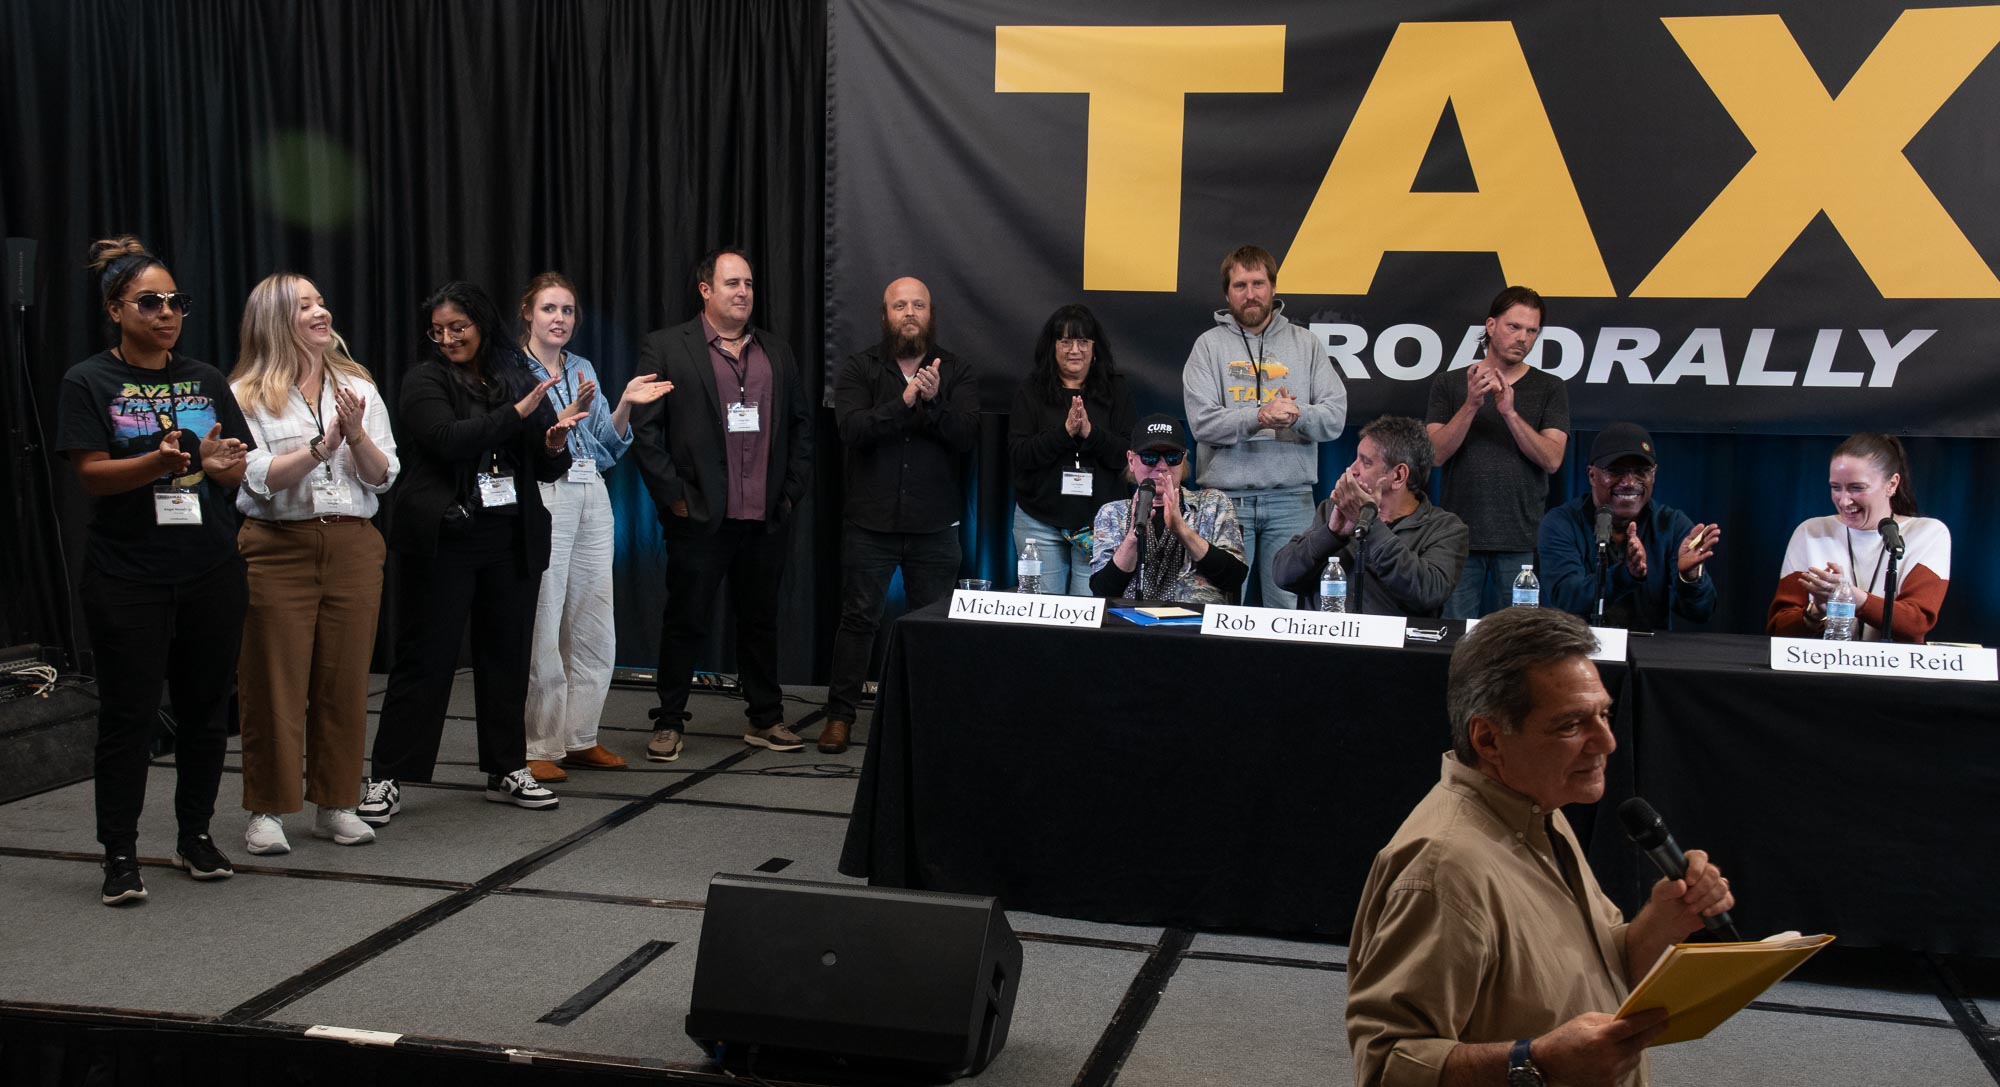 The TAXI staff gets ready to take a well-deserved bow at the end of the 2023 Road Rally. They are (from left to right); Angel Maradiaga, Ariana Cubillos Voegler, Ashmita Deo, Briagha Abrahamson, Craig Pilo, Eric Anderson, Liz Cohen, Matt Hutchison, and Tom Stillwagon.